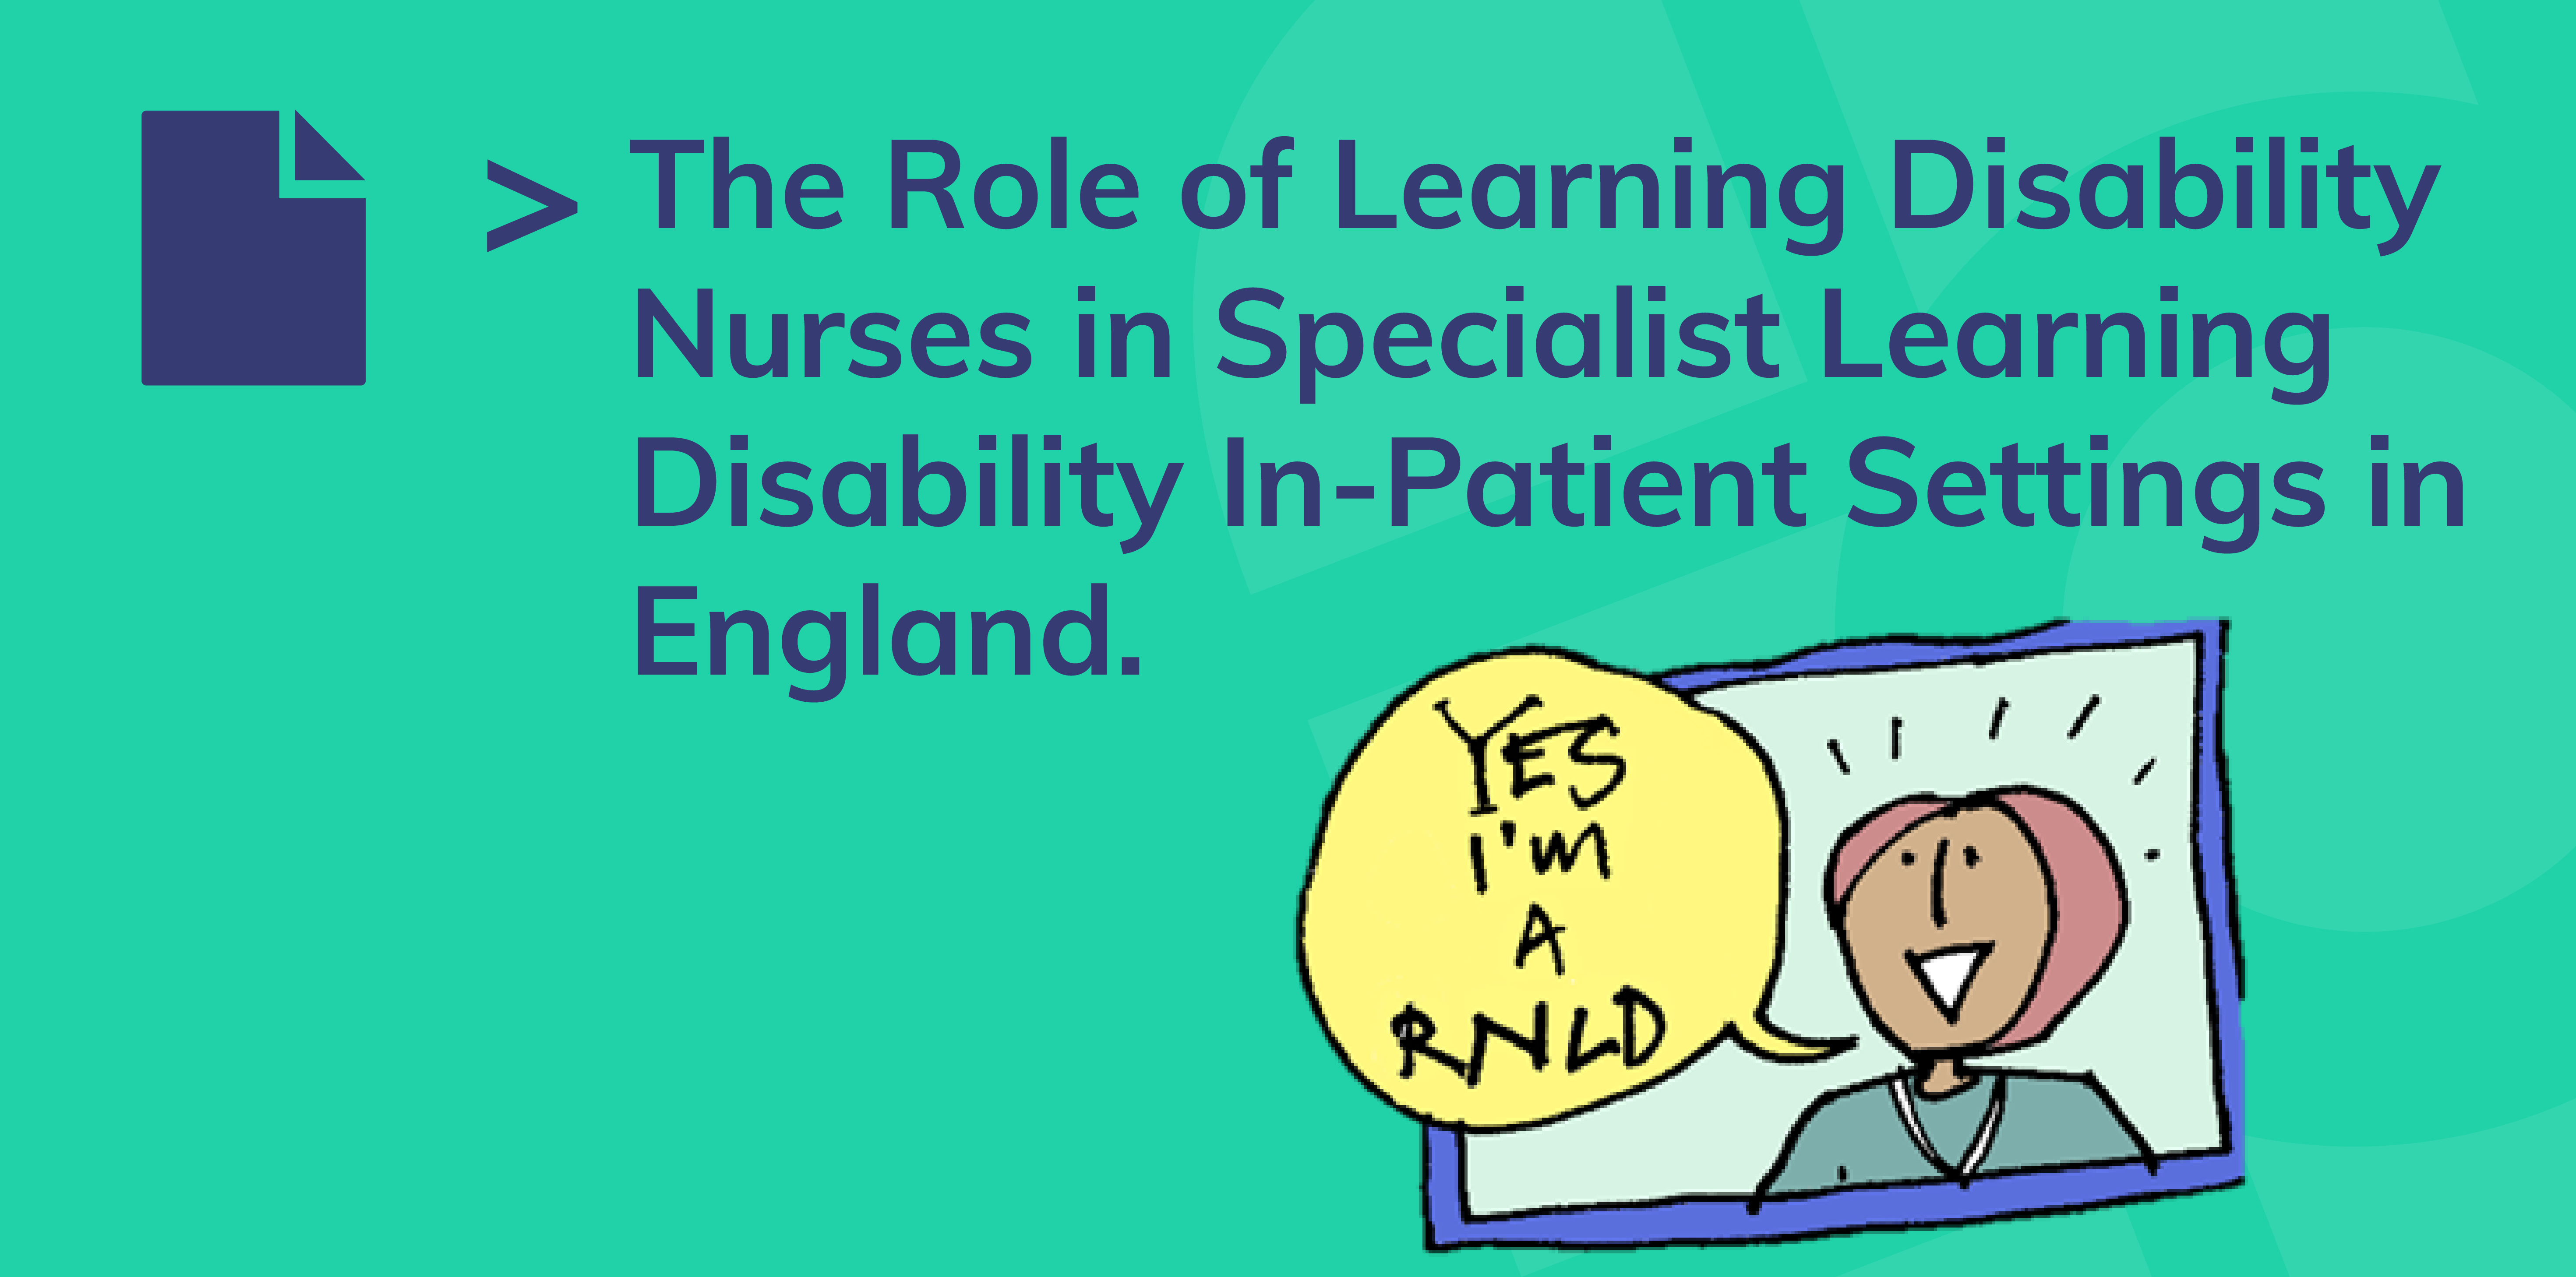 The role of LD nurses report 01